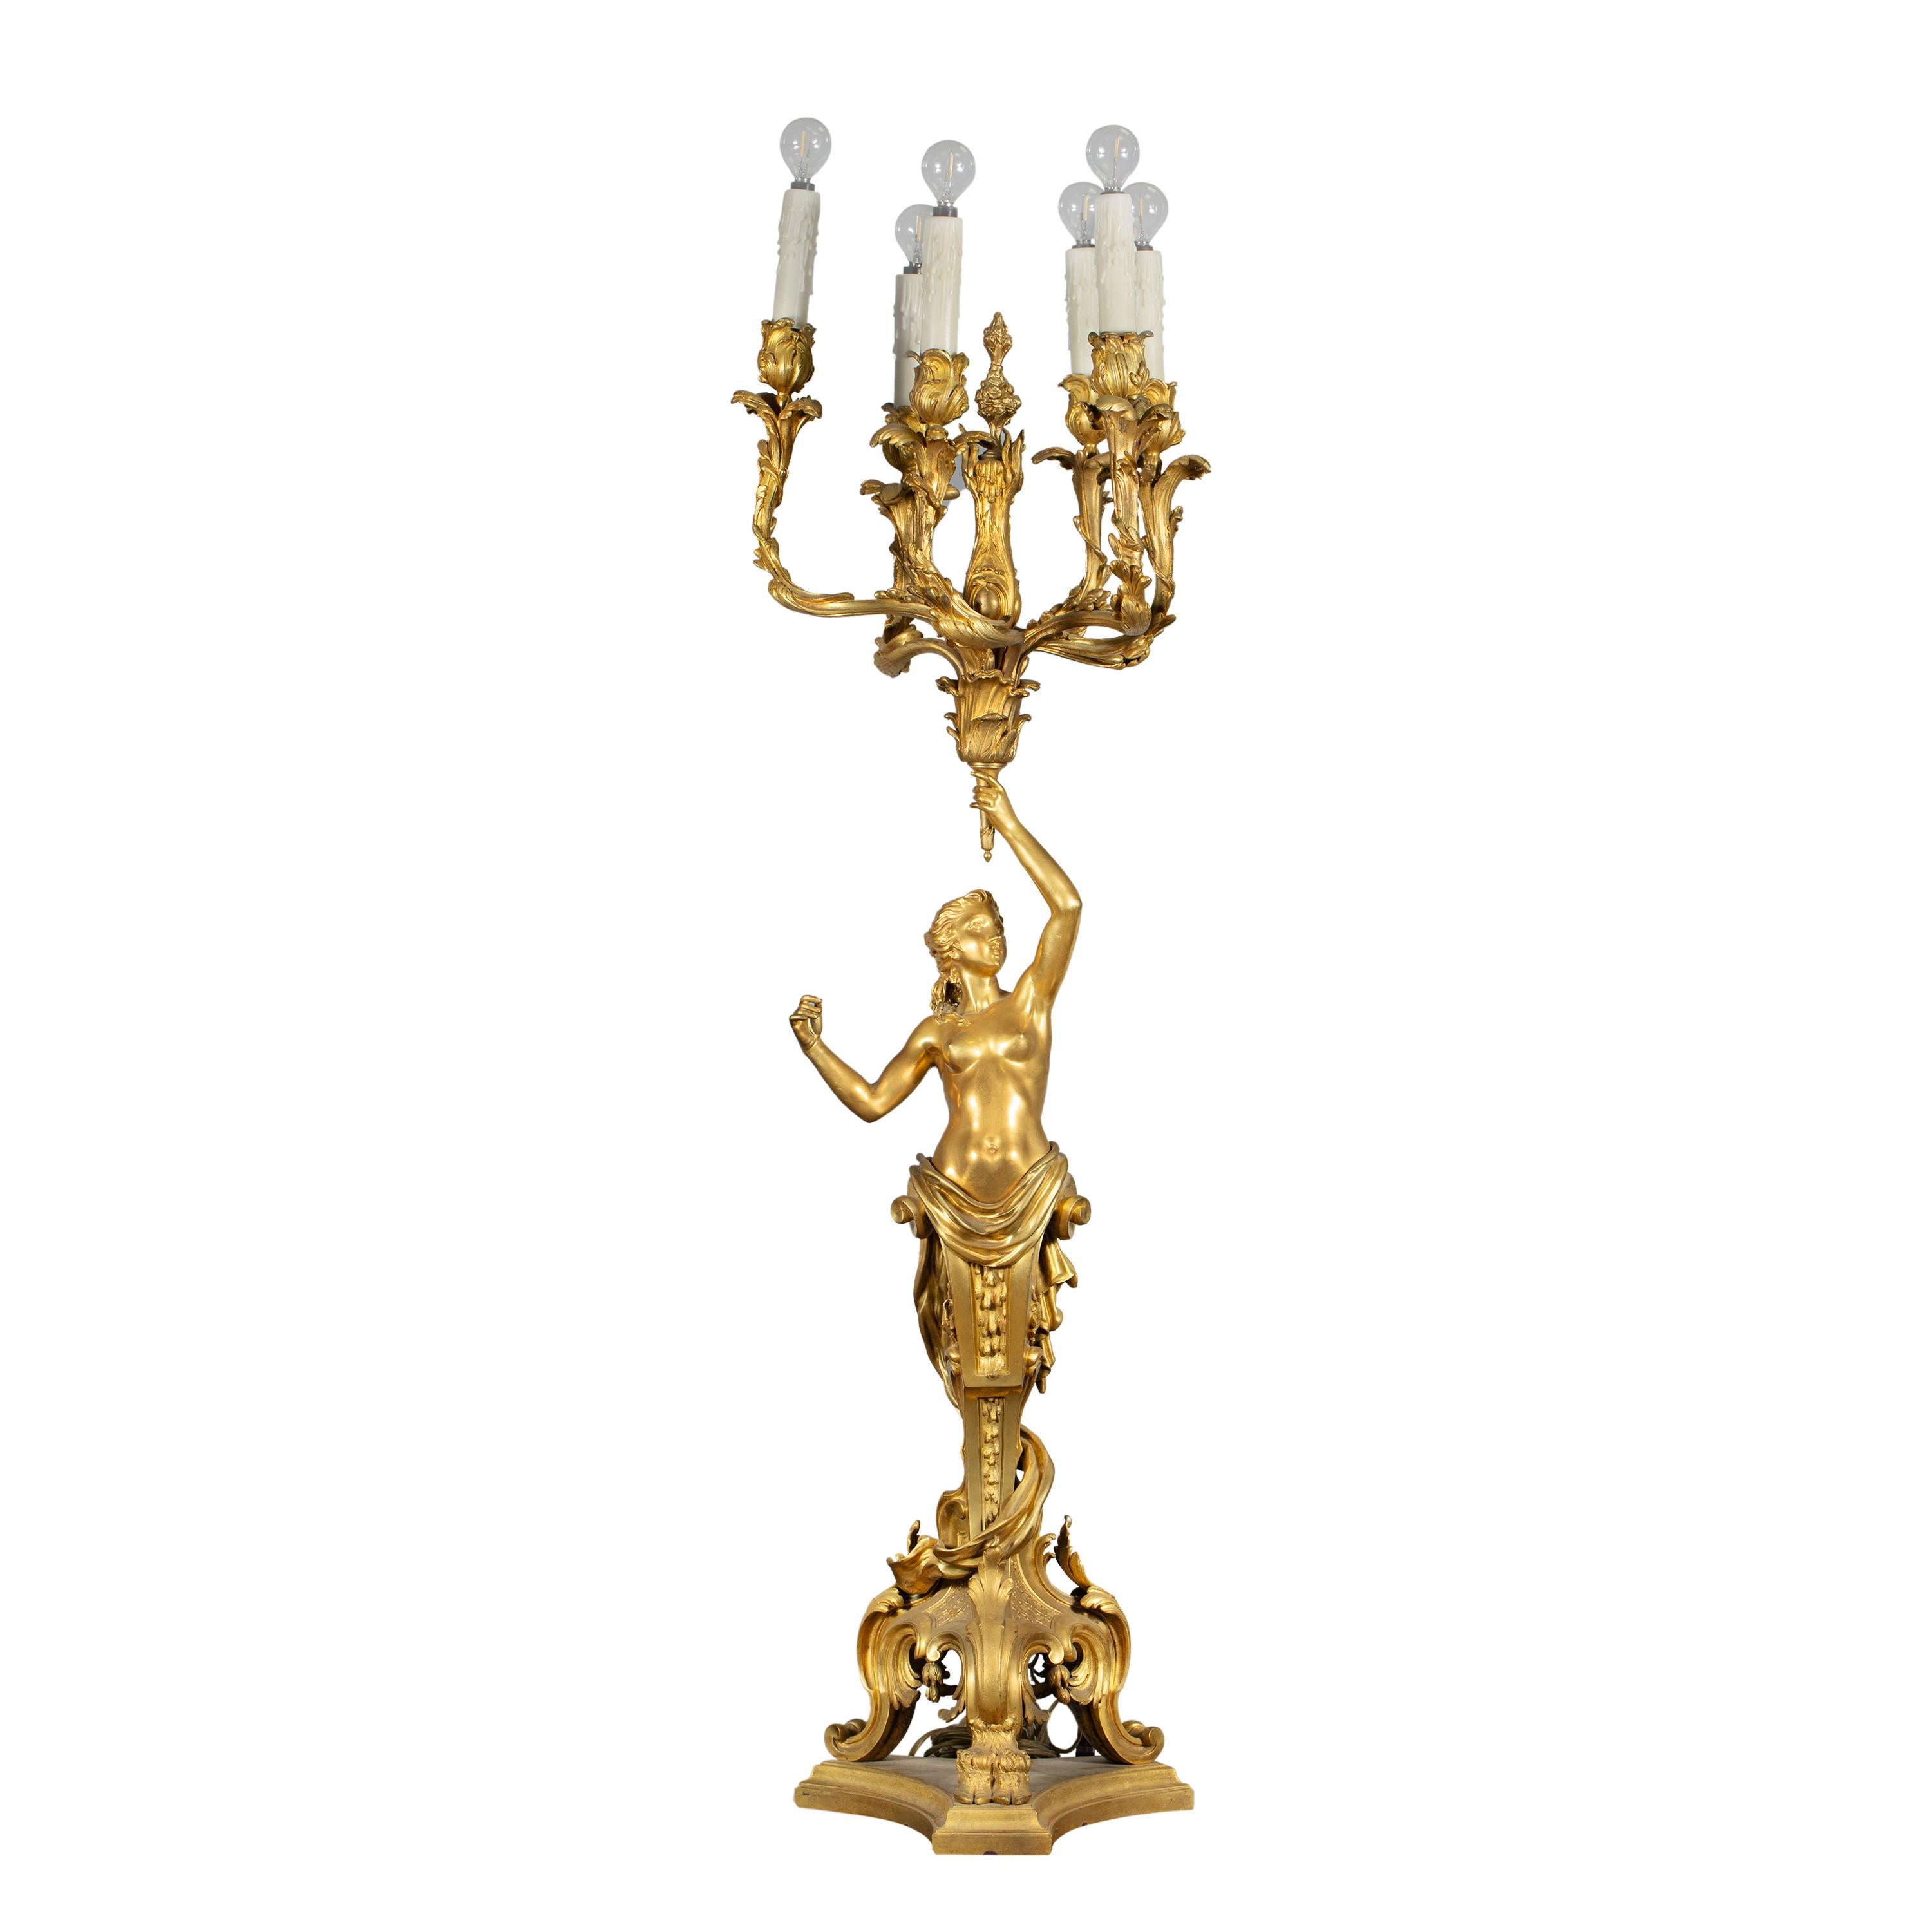 A grandiose piece indeed! This large ormolu bronze five-branch candelabra, crafted in the 19th century, draws inspiration from the models created by Claude Michel Clodion. Known for his intricate design and artistry, the candelabra features ornate